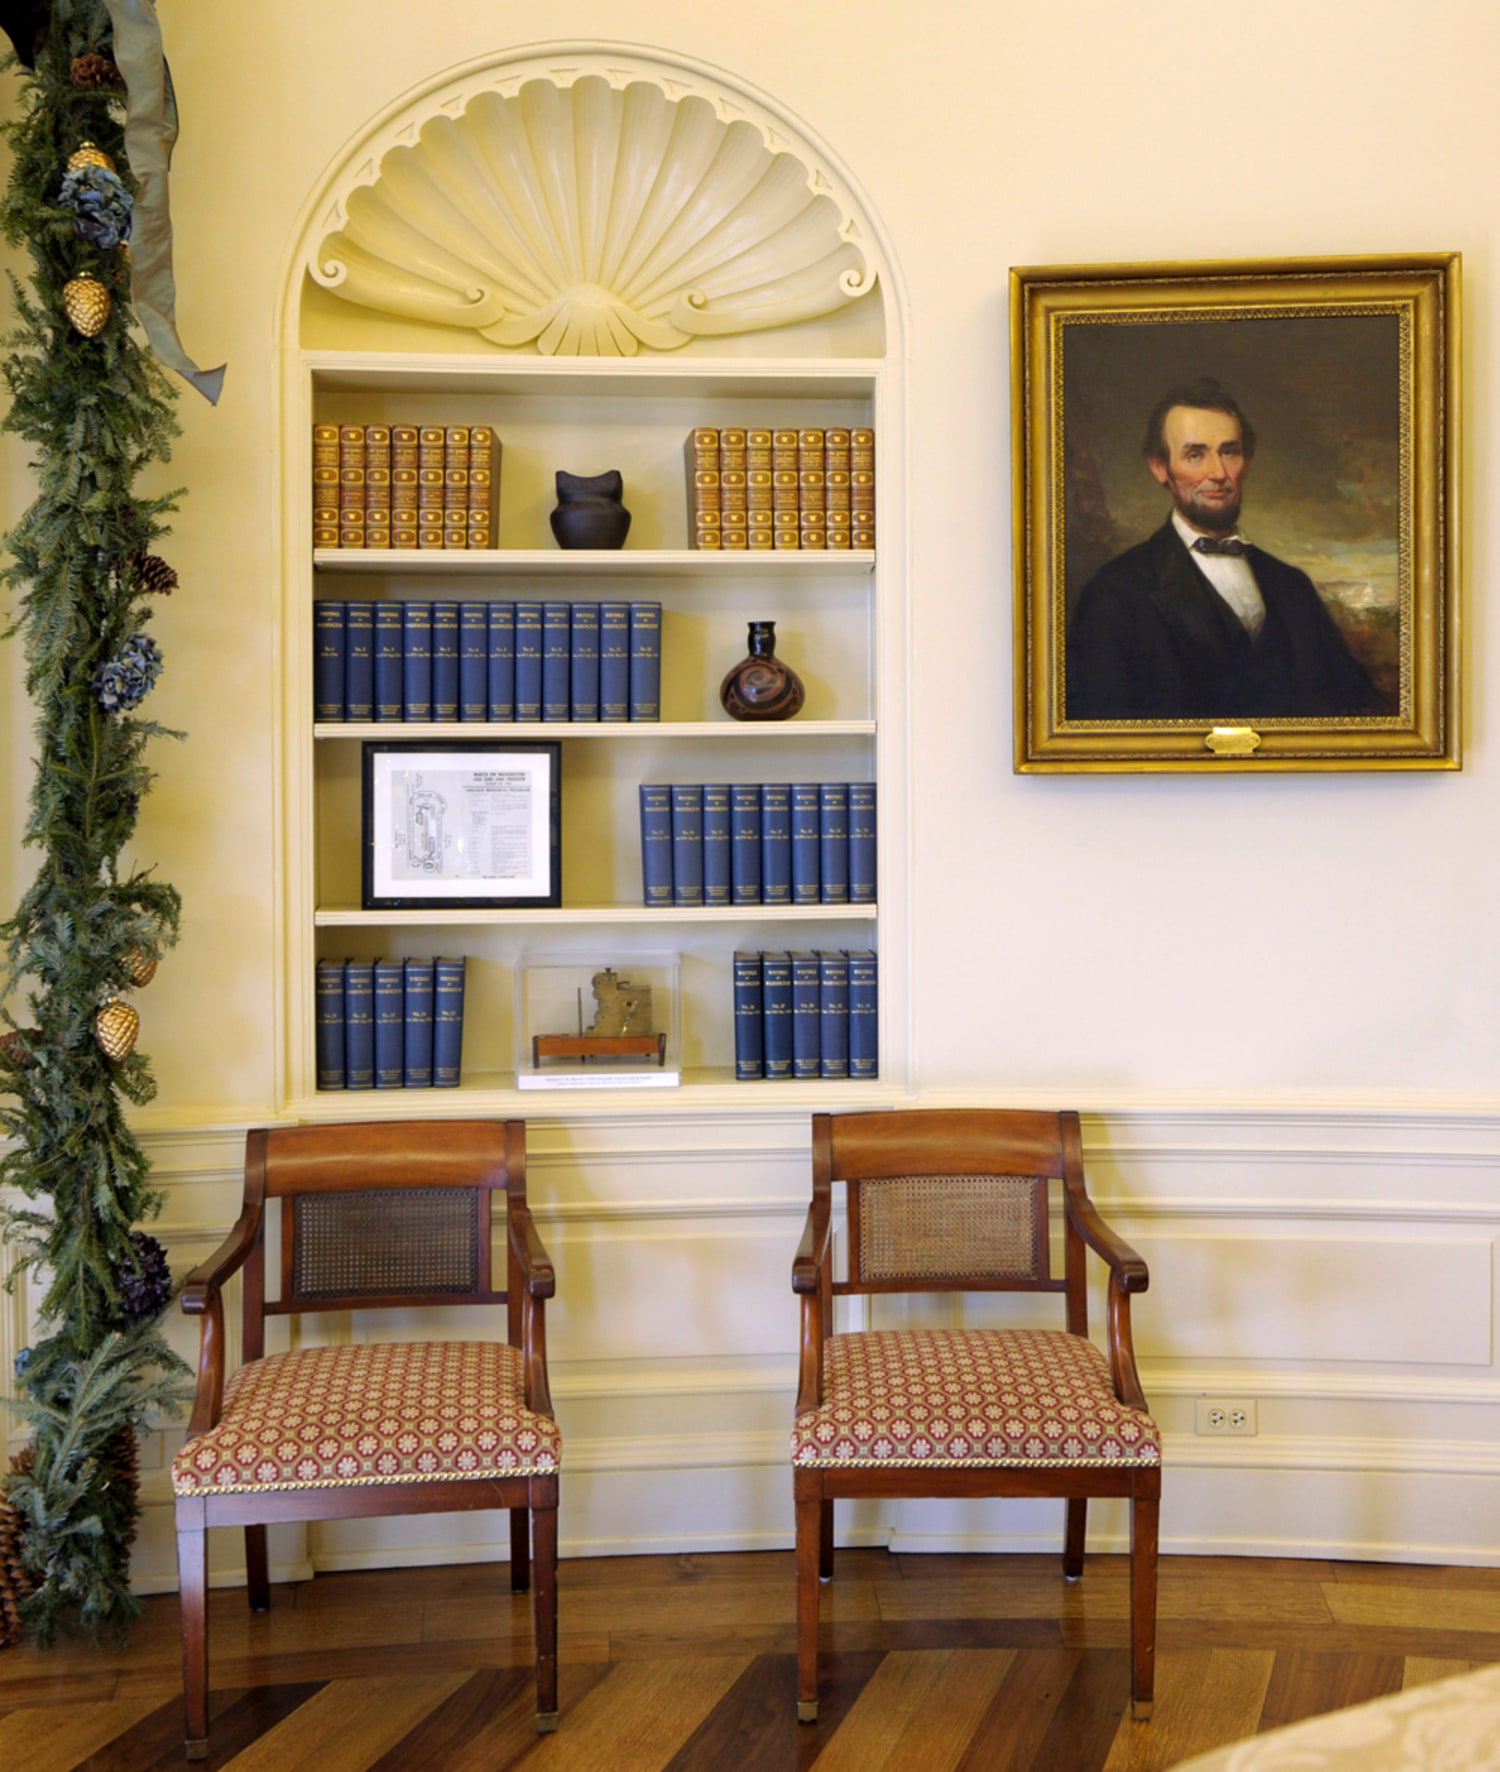 Obama adds his style to Oval Office decor